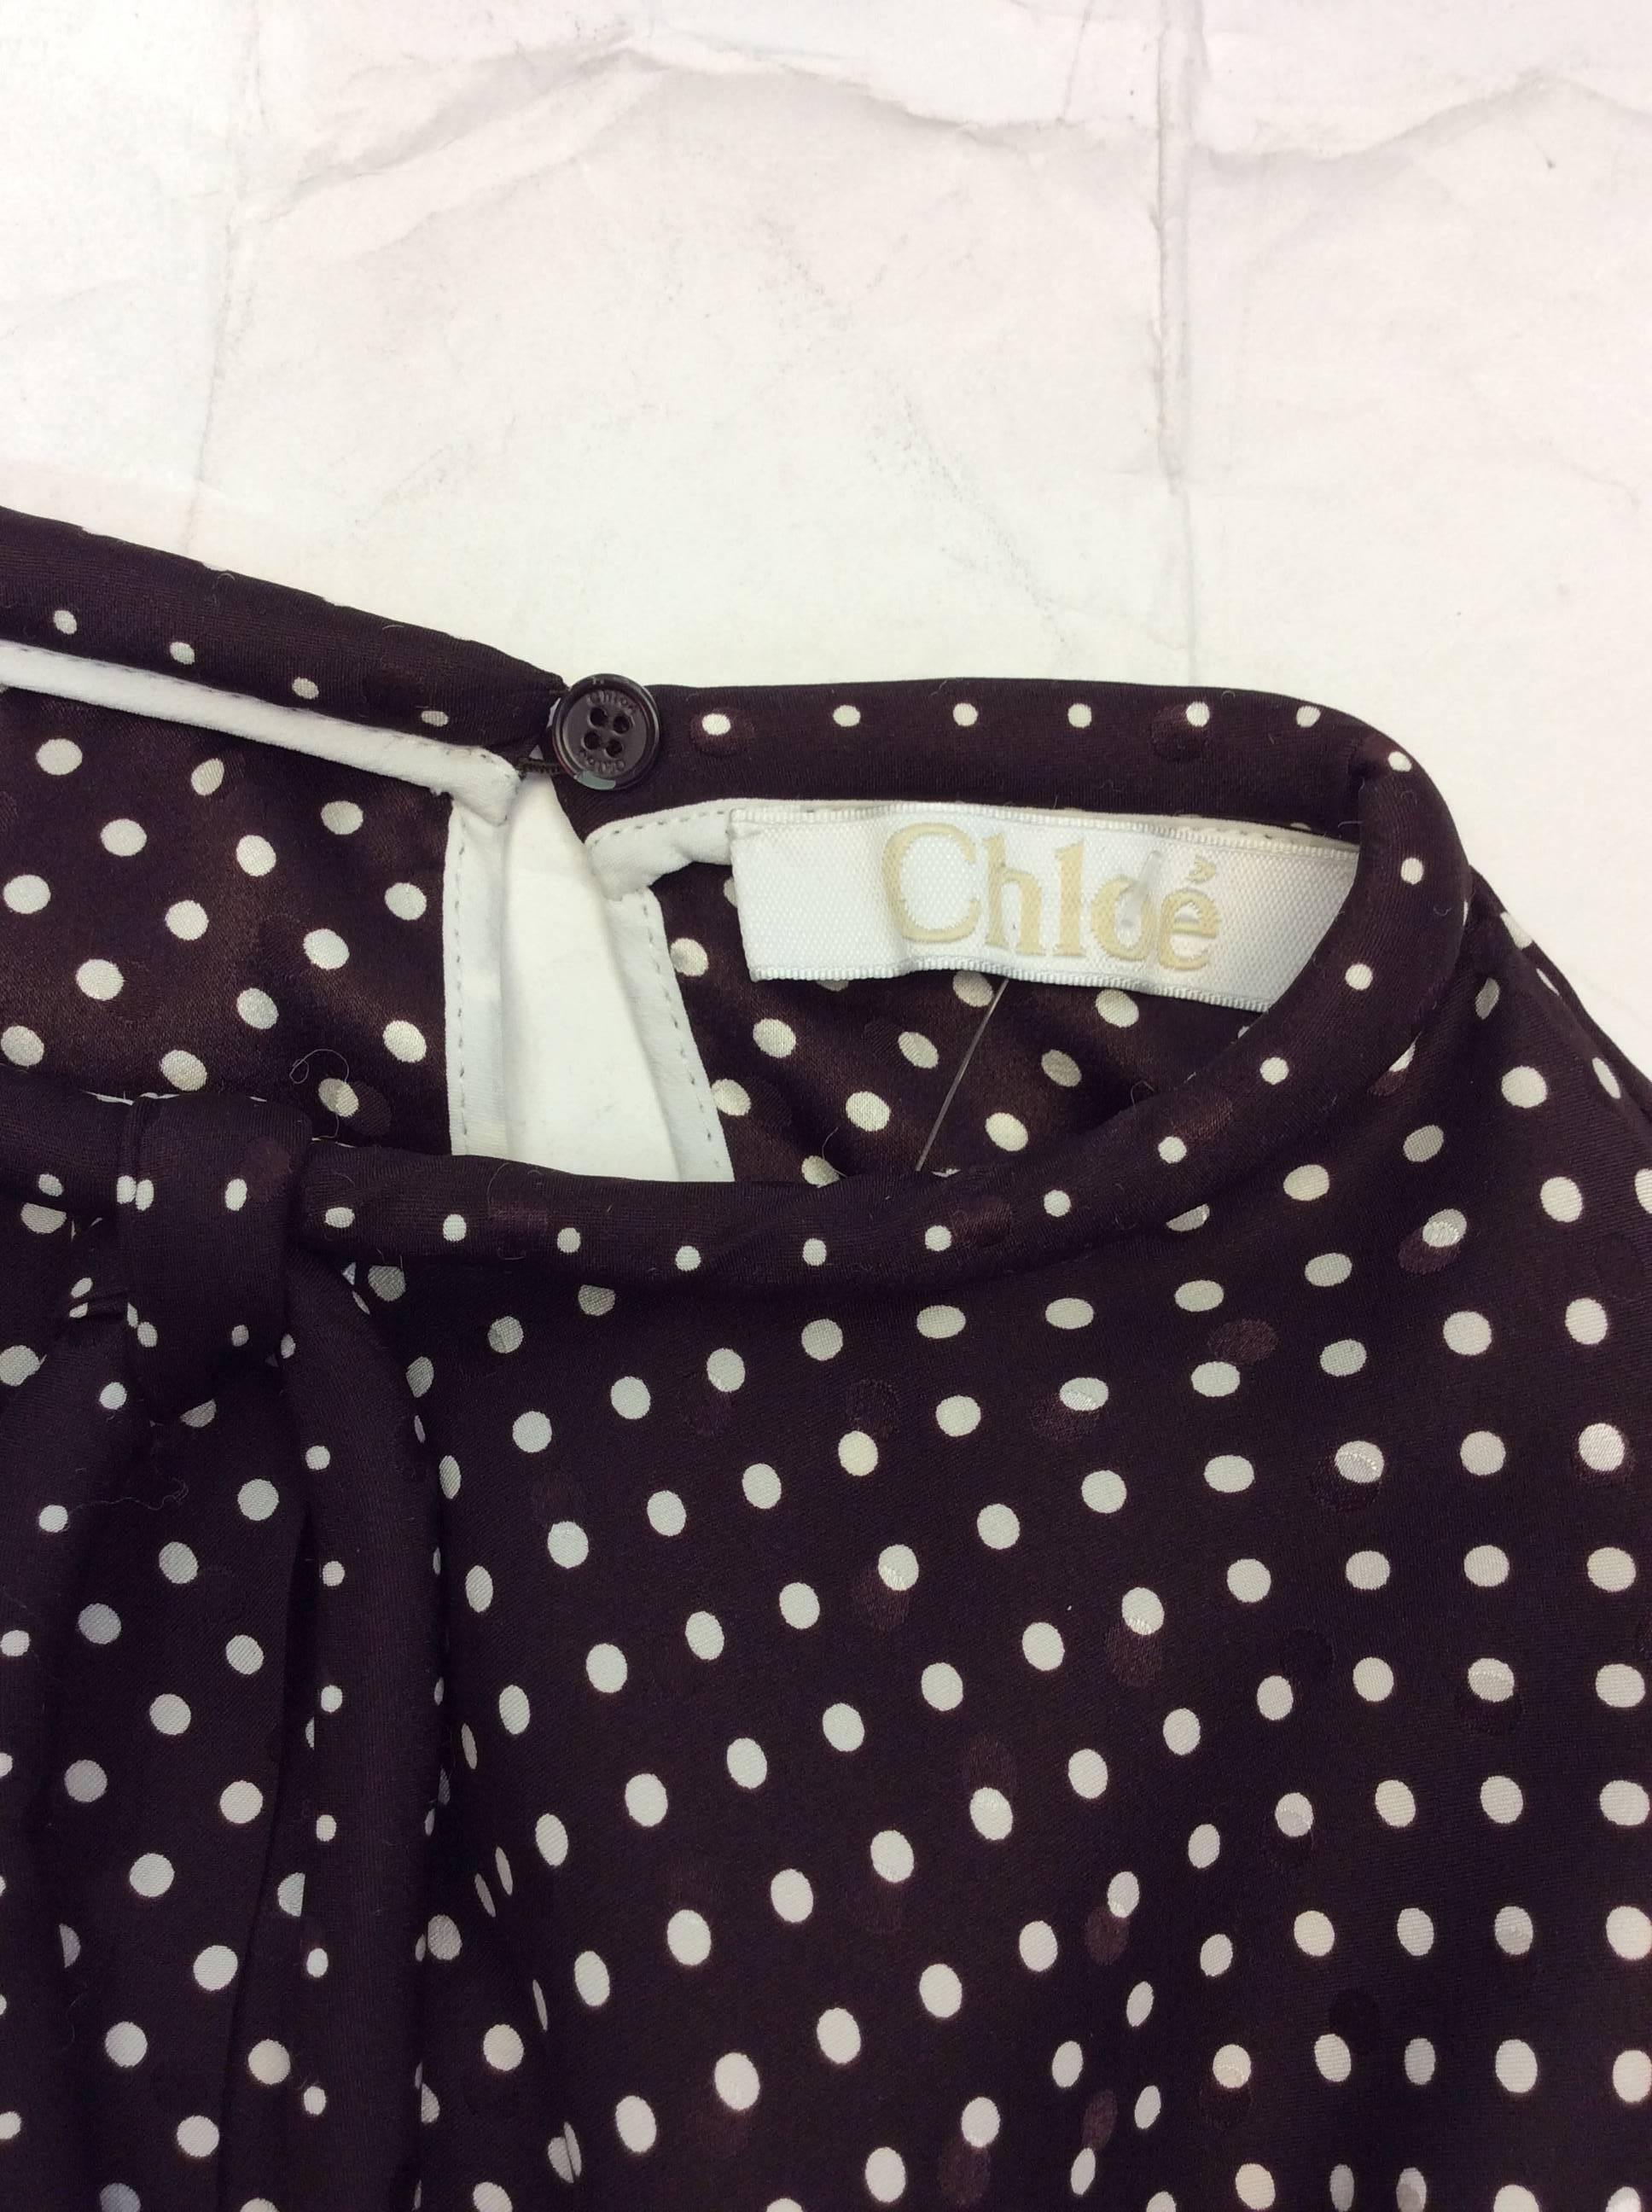 Women's Chloe Brown Polka Dot Blouse with Neck Tie For Sale